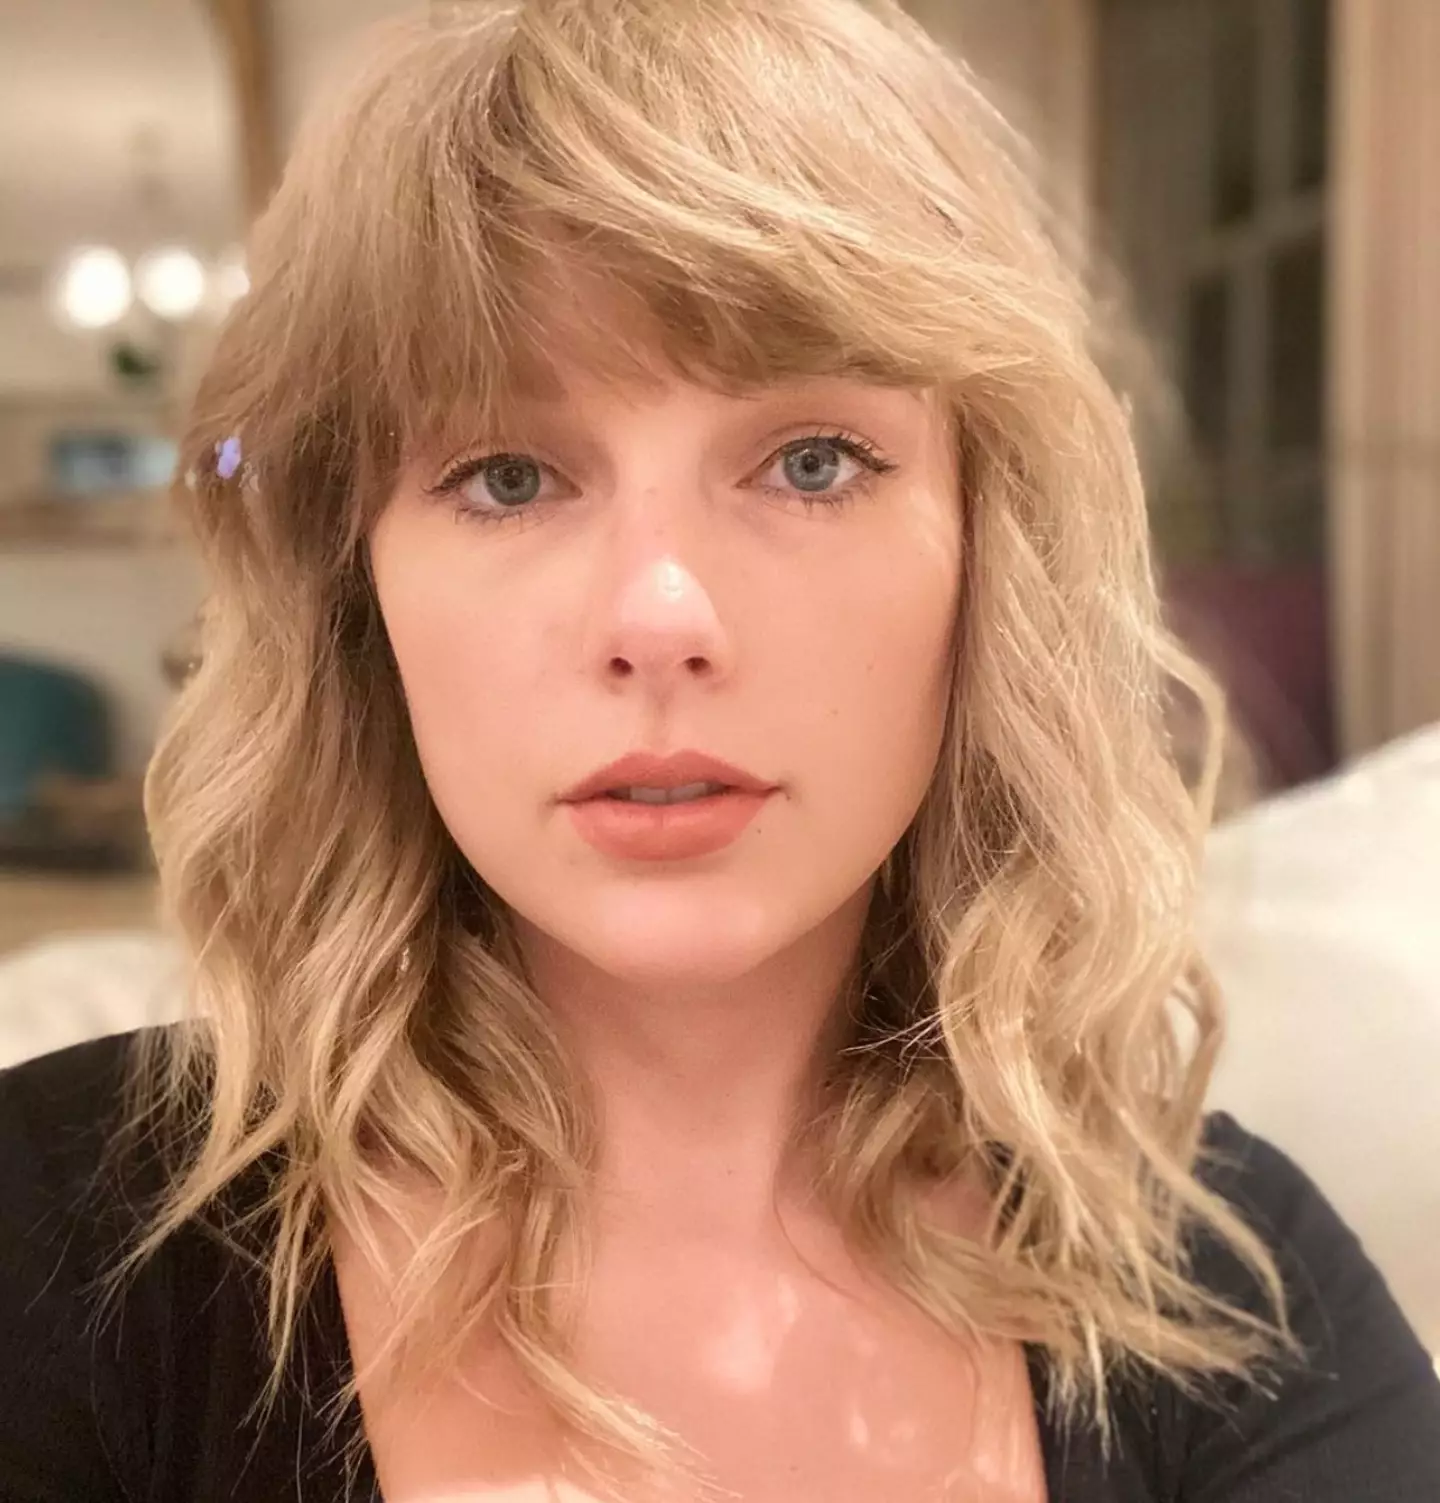 Taylor Swift has recently announced a tour of her new album.